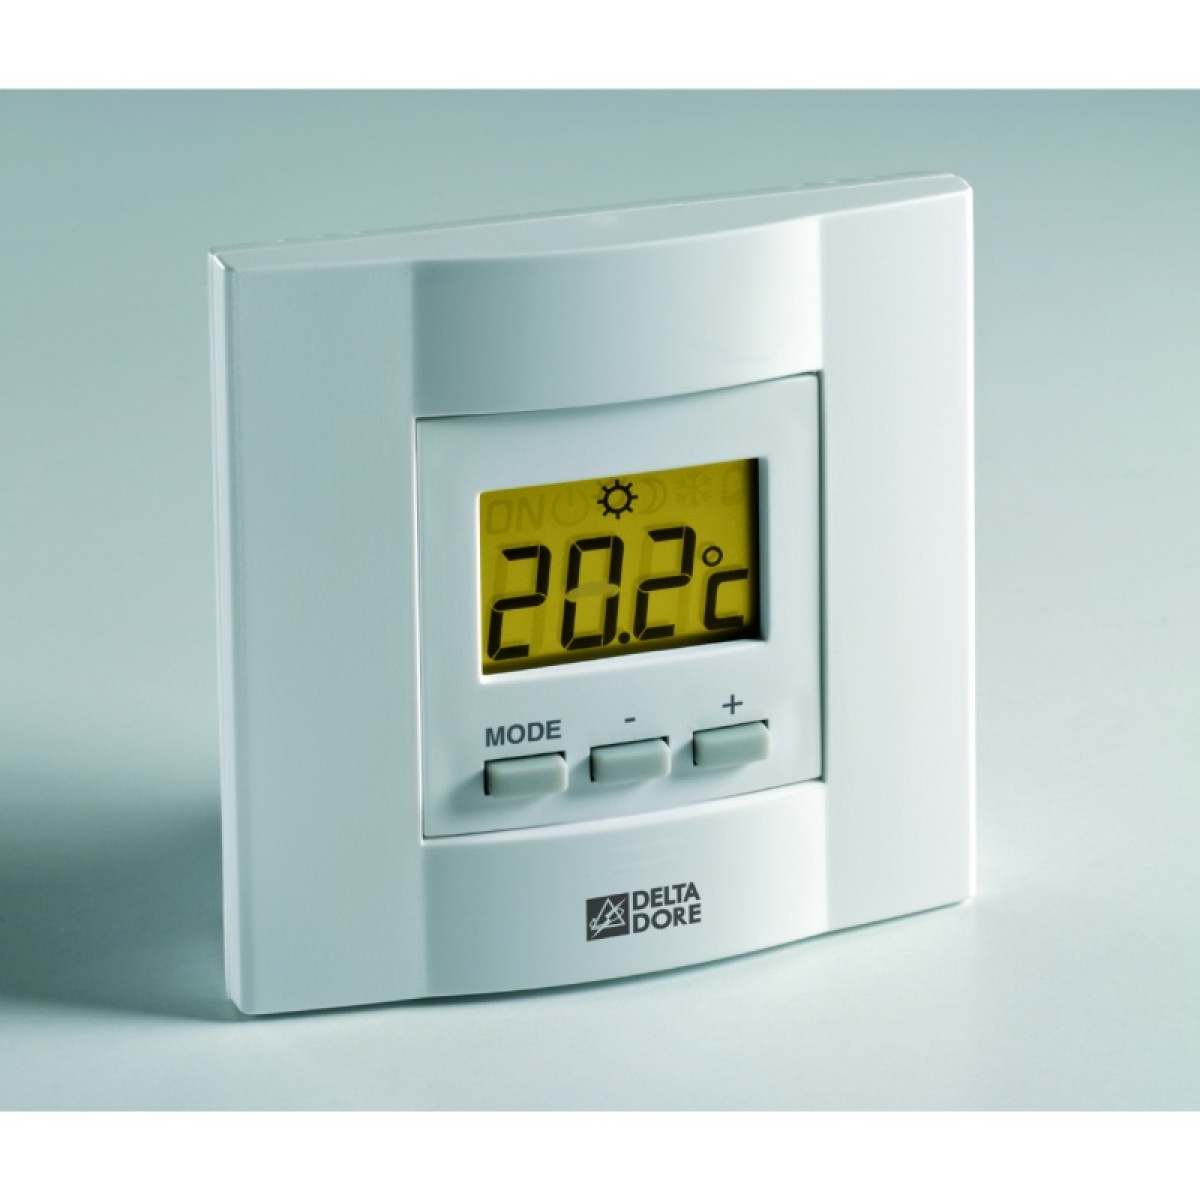 Thermostat Delta Dore Thermostat d'ambiance à touches TYBOX 21 DELTA DORE